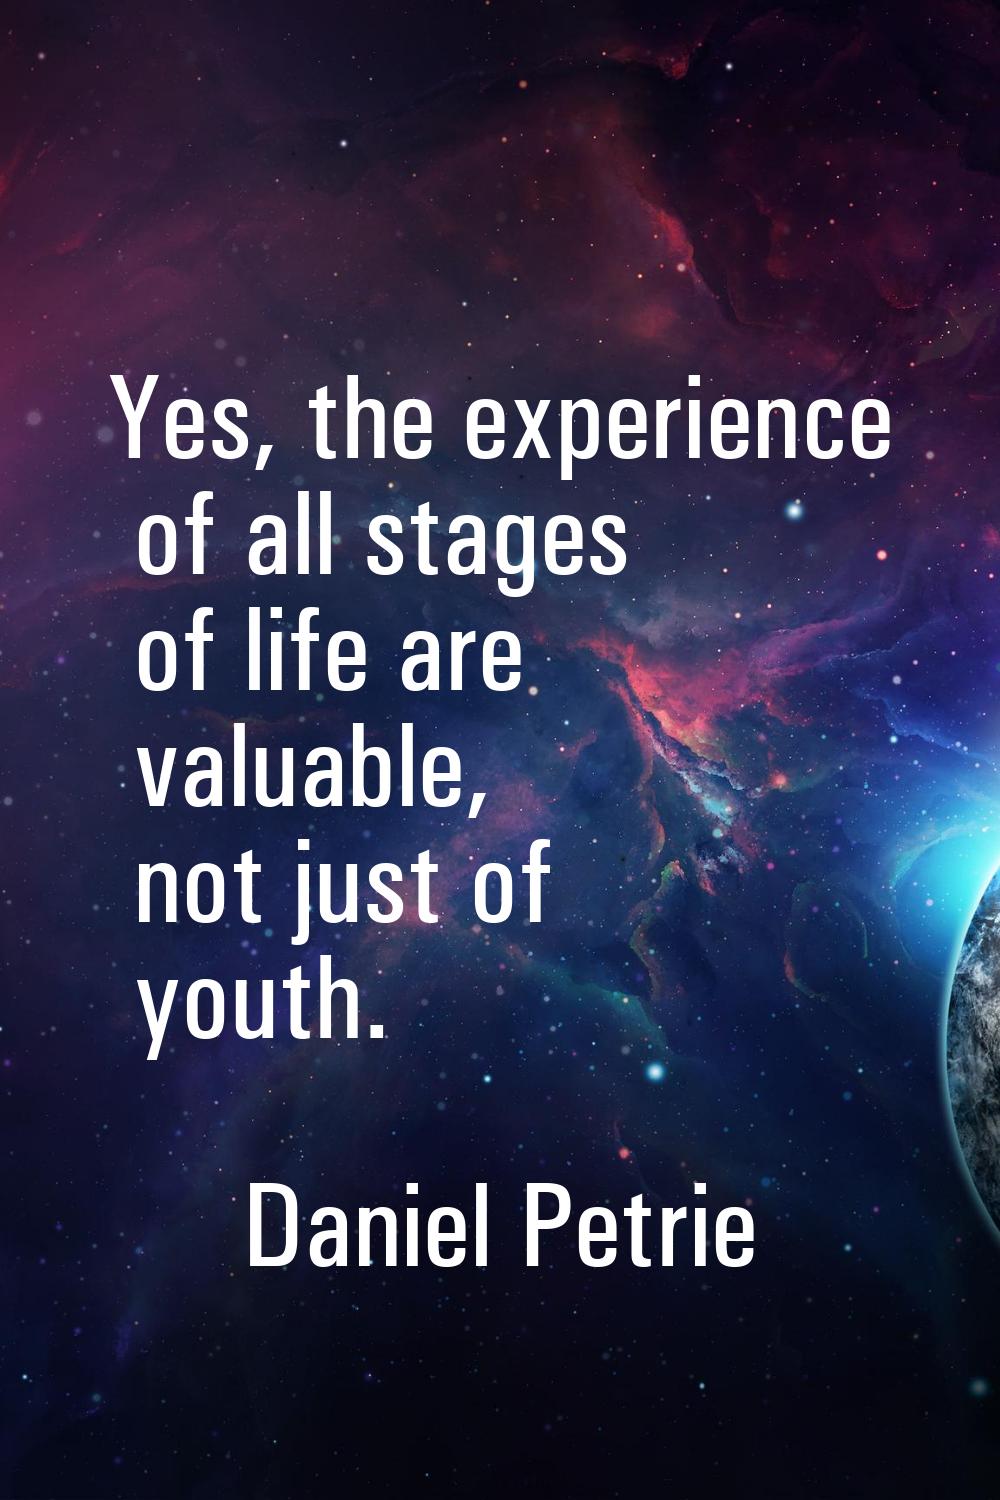 Yes, the experience of all stages of life are valuable, not just of youth.